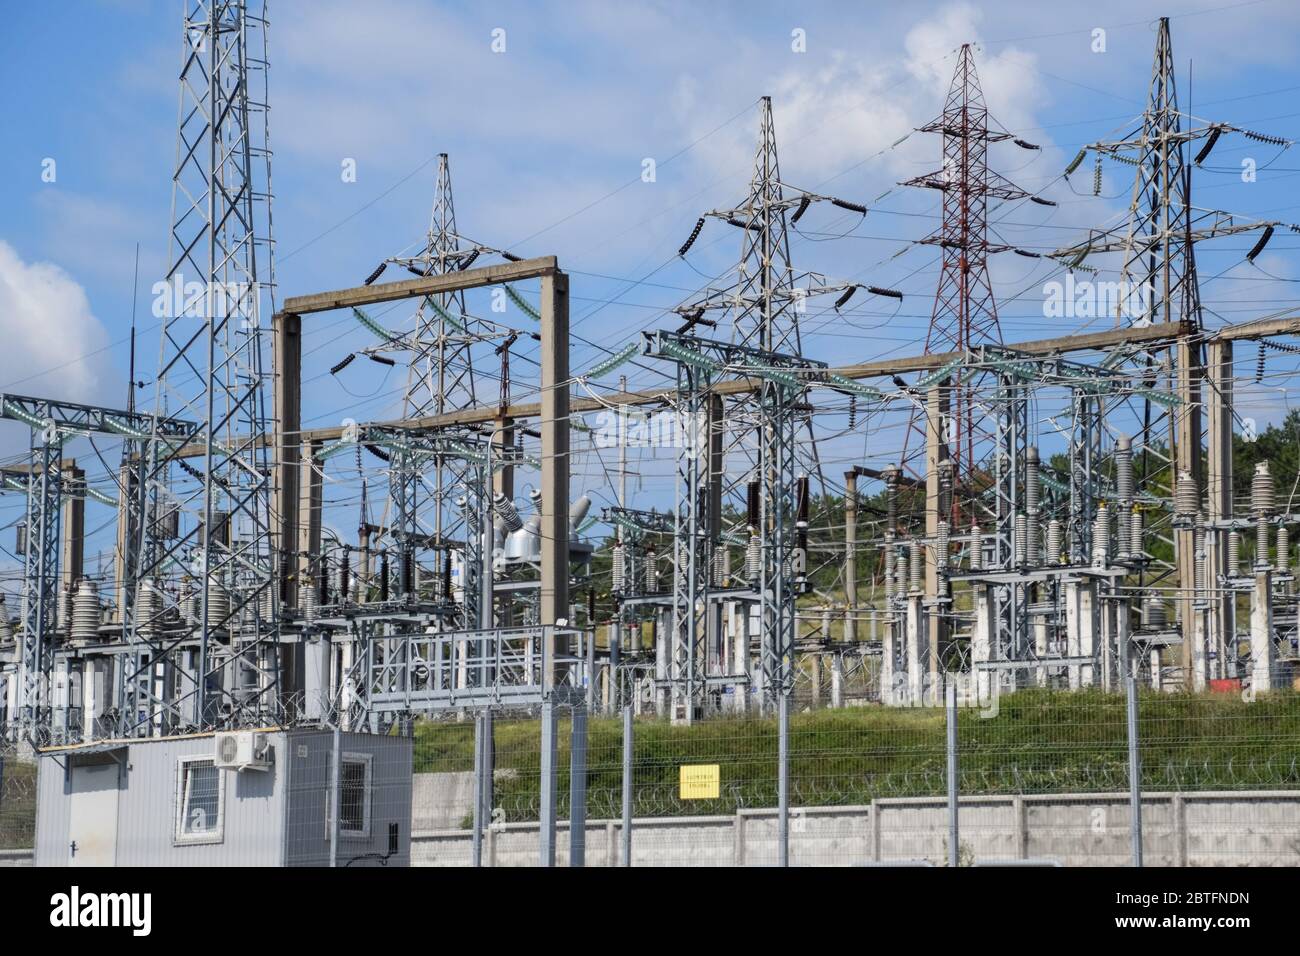 a Power substation equipment, transformers and wire poles. Stock Photo